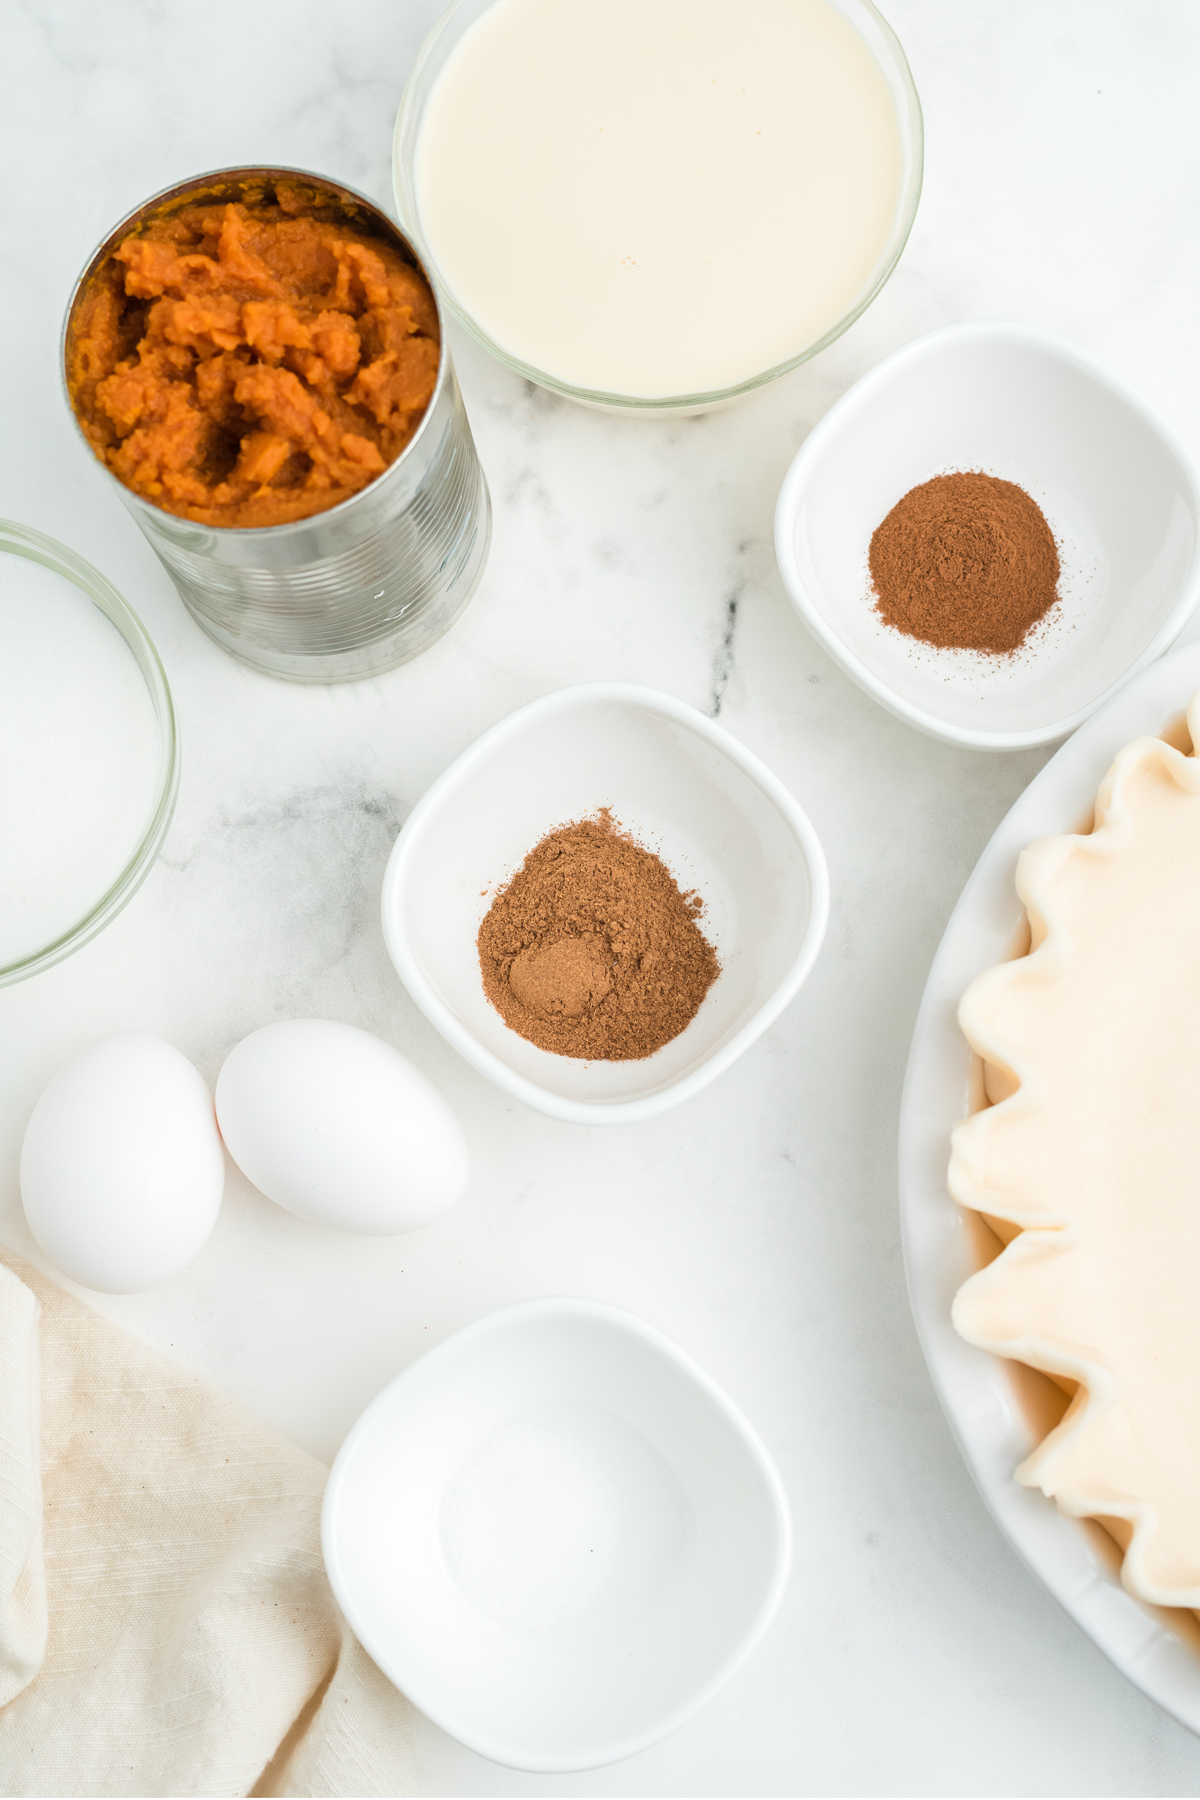 Classic Pumpkin Pie ingredients on a white counter. The ingredients are the following: sugar, cinnamon, salt, pumpkin pie spice blend, large eggs, pumpkin, evaporated milk, and deep dish pie shell. 